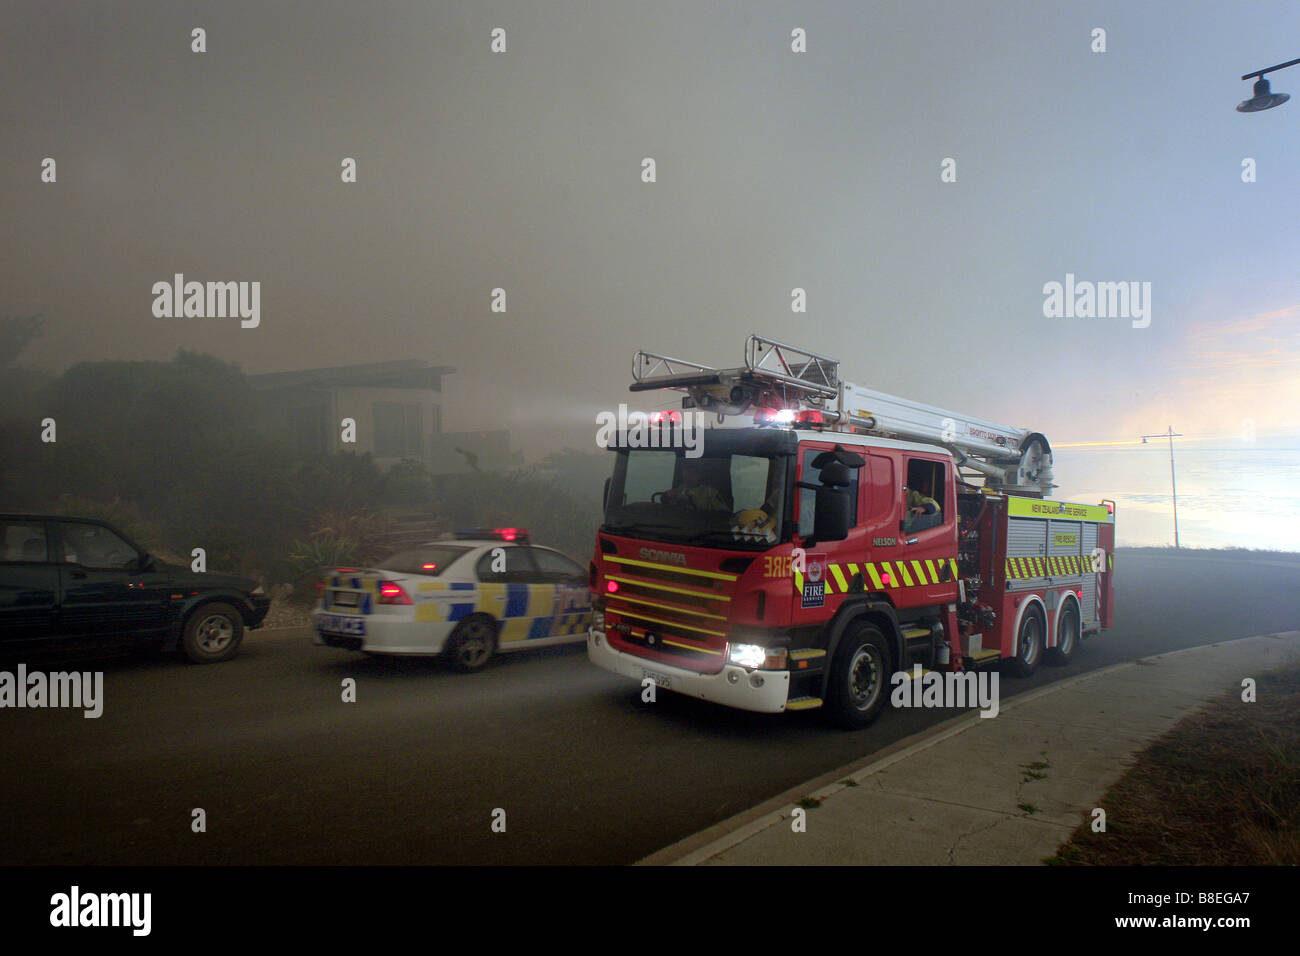 fire truck passes a police car as it arrives at the scene of a major bushfire in New Zealand Stock Photo